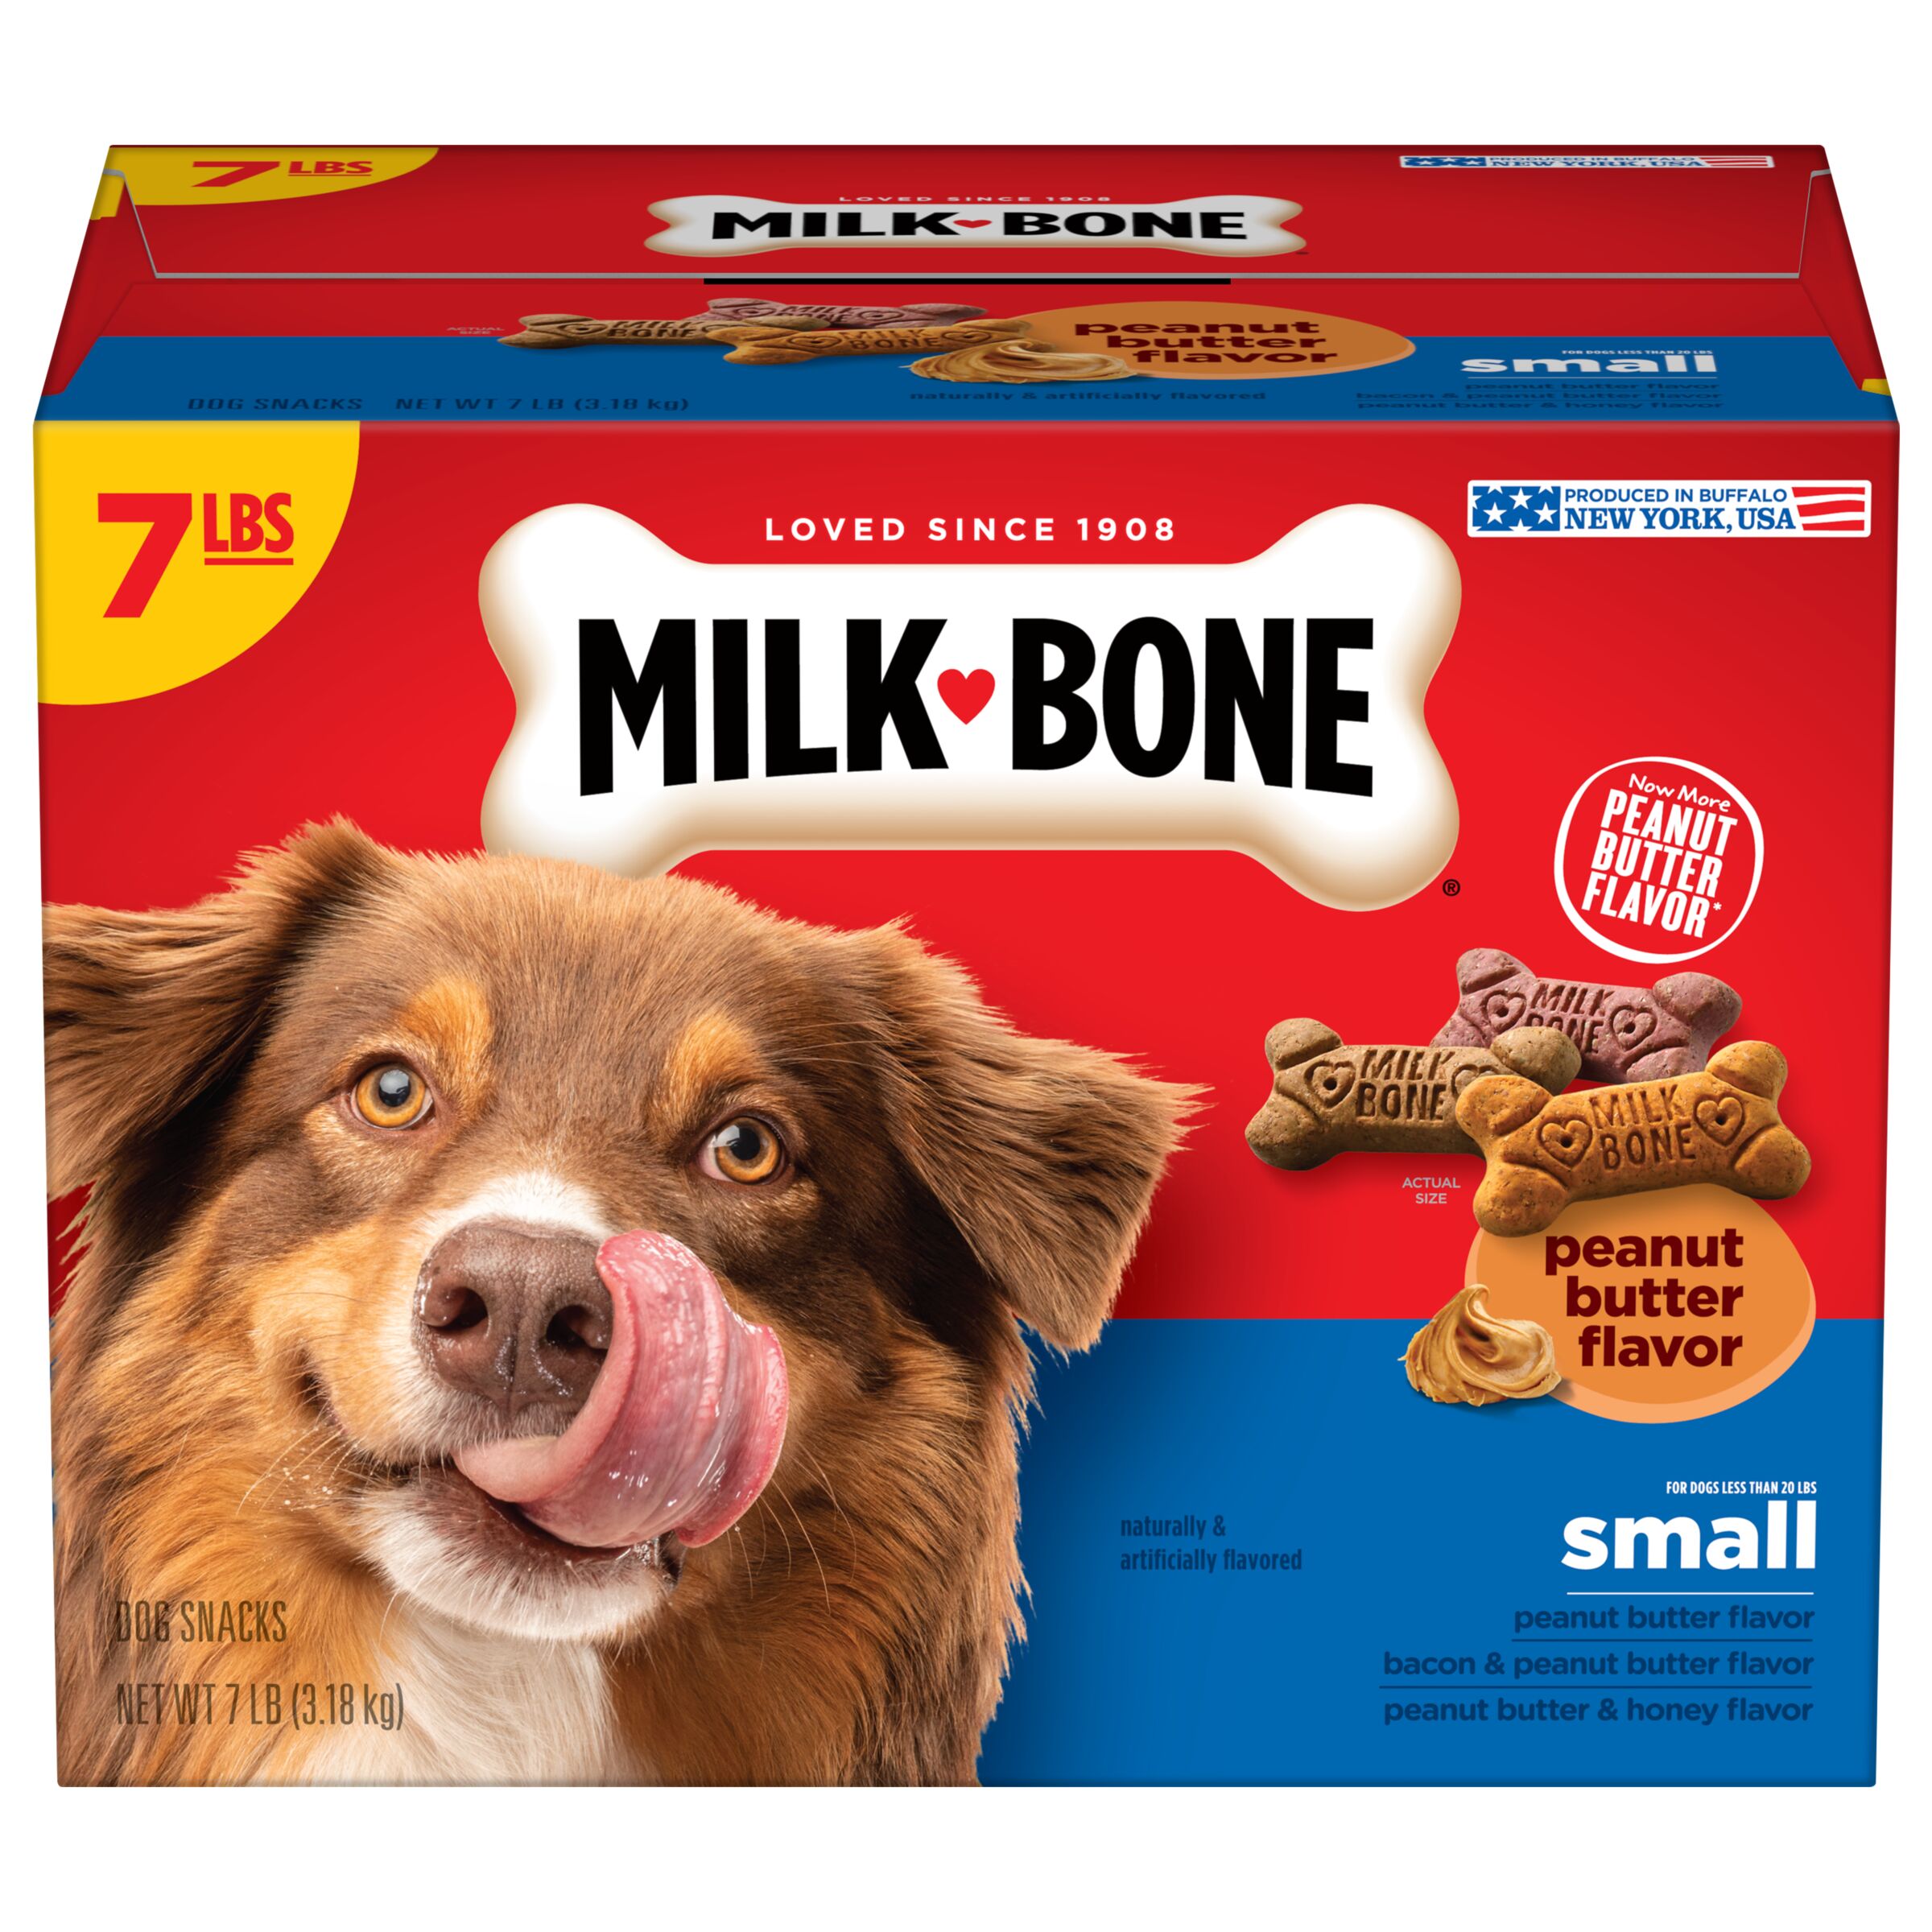 Milk-Bone Peanut Butter Flavor Naturally & Artificially Flavored Dog Biscuits, Crunchy Dog Treats, 7 Pounds - image 1 of 10